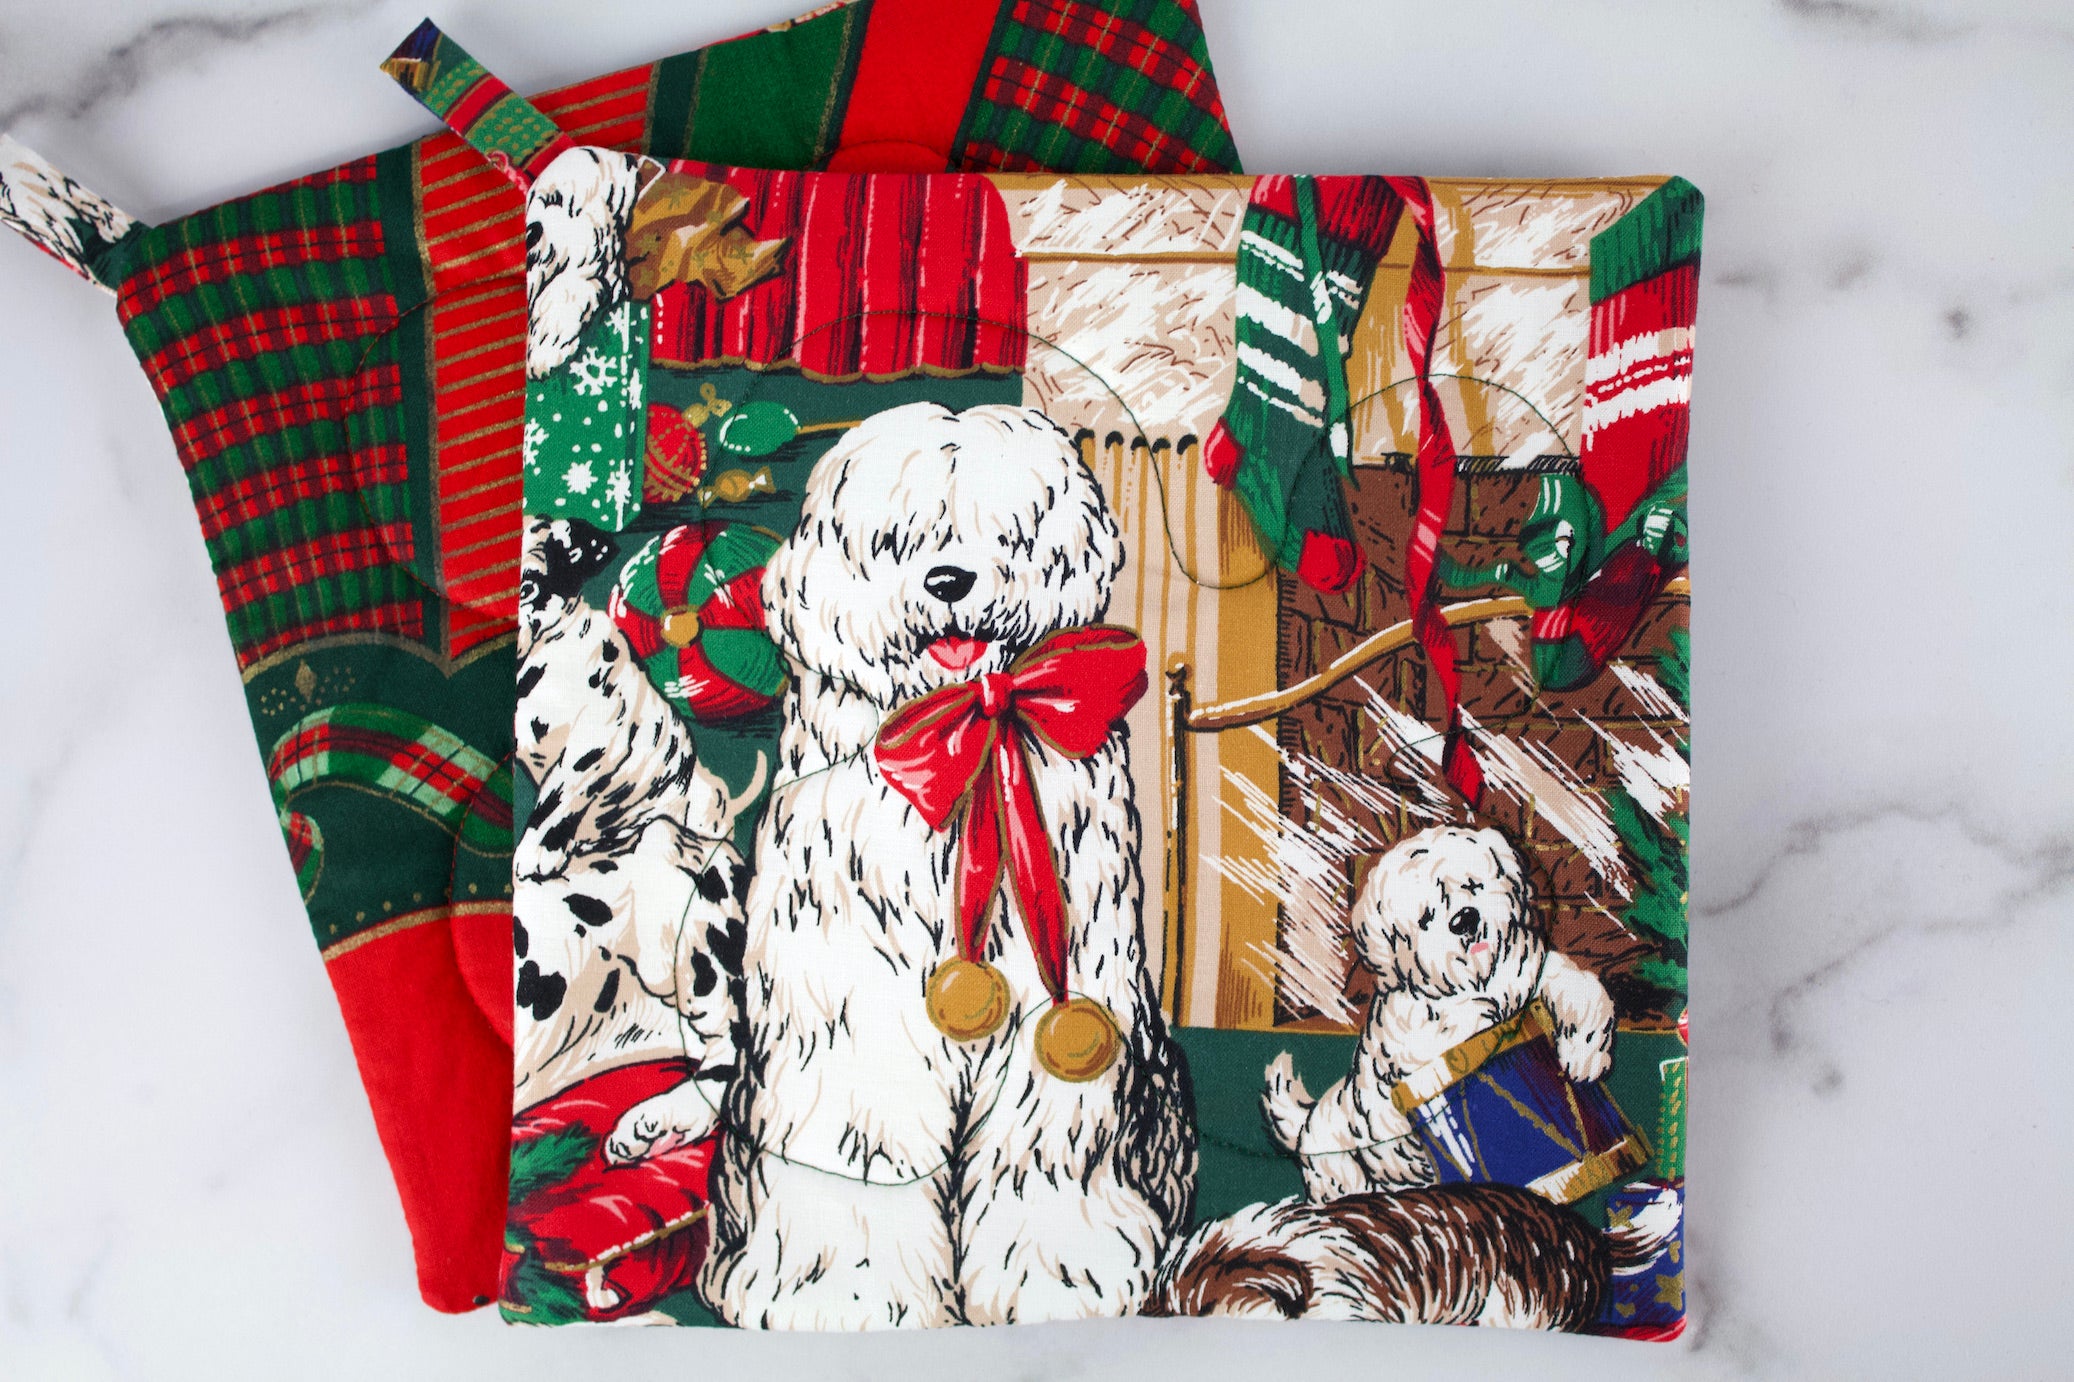 It's a Dog's Life at Christmas Potholder-The Blue Peony-Animal_Dog,Category_Pot Holder,Color_Green,Color_Red,Department_Kitchen,Size_Traditional (Square),Theme_Animal,Theme_Christmas,Theme_Winter